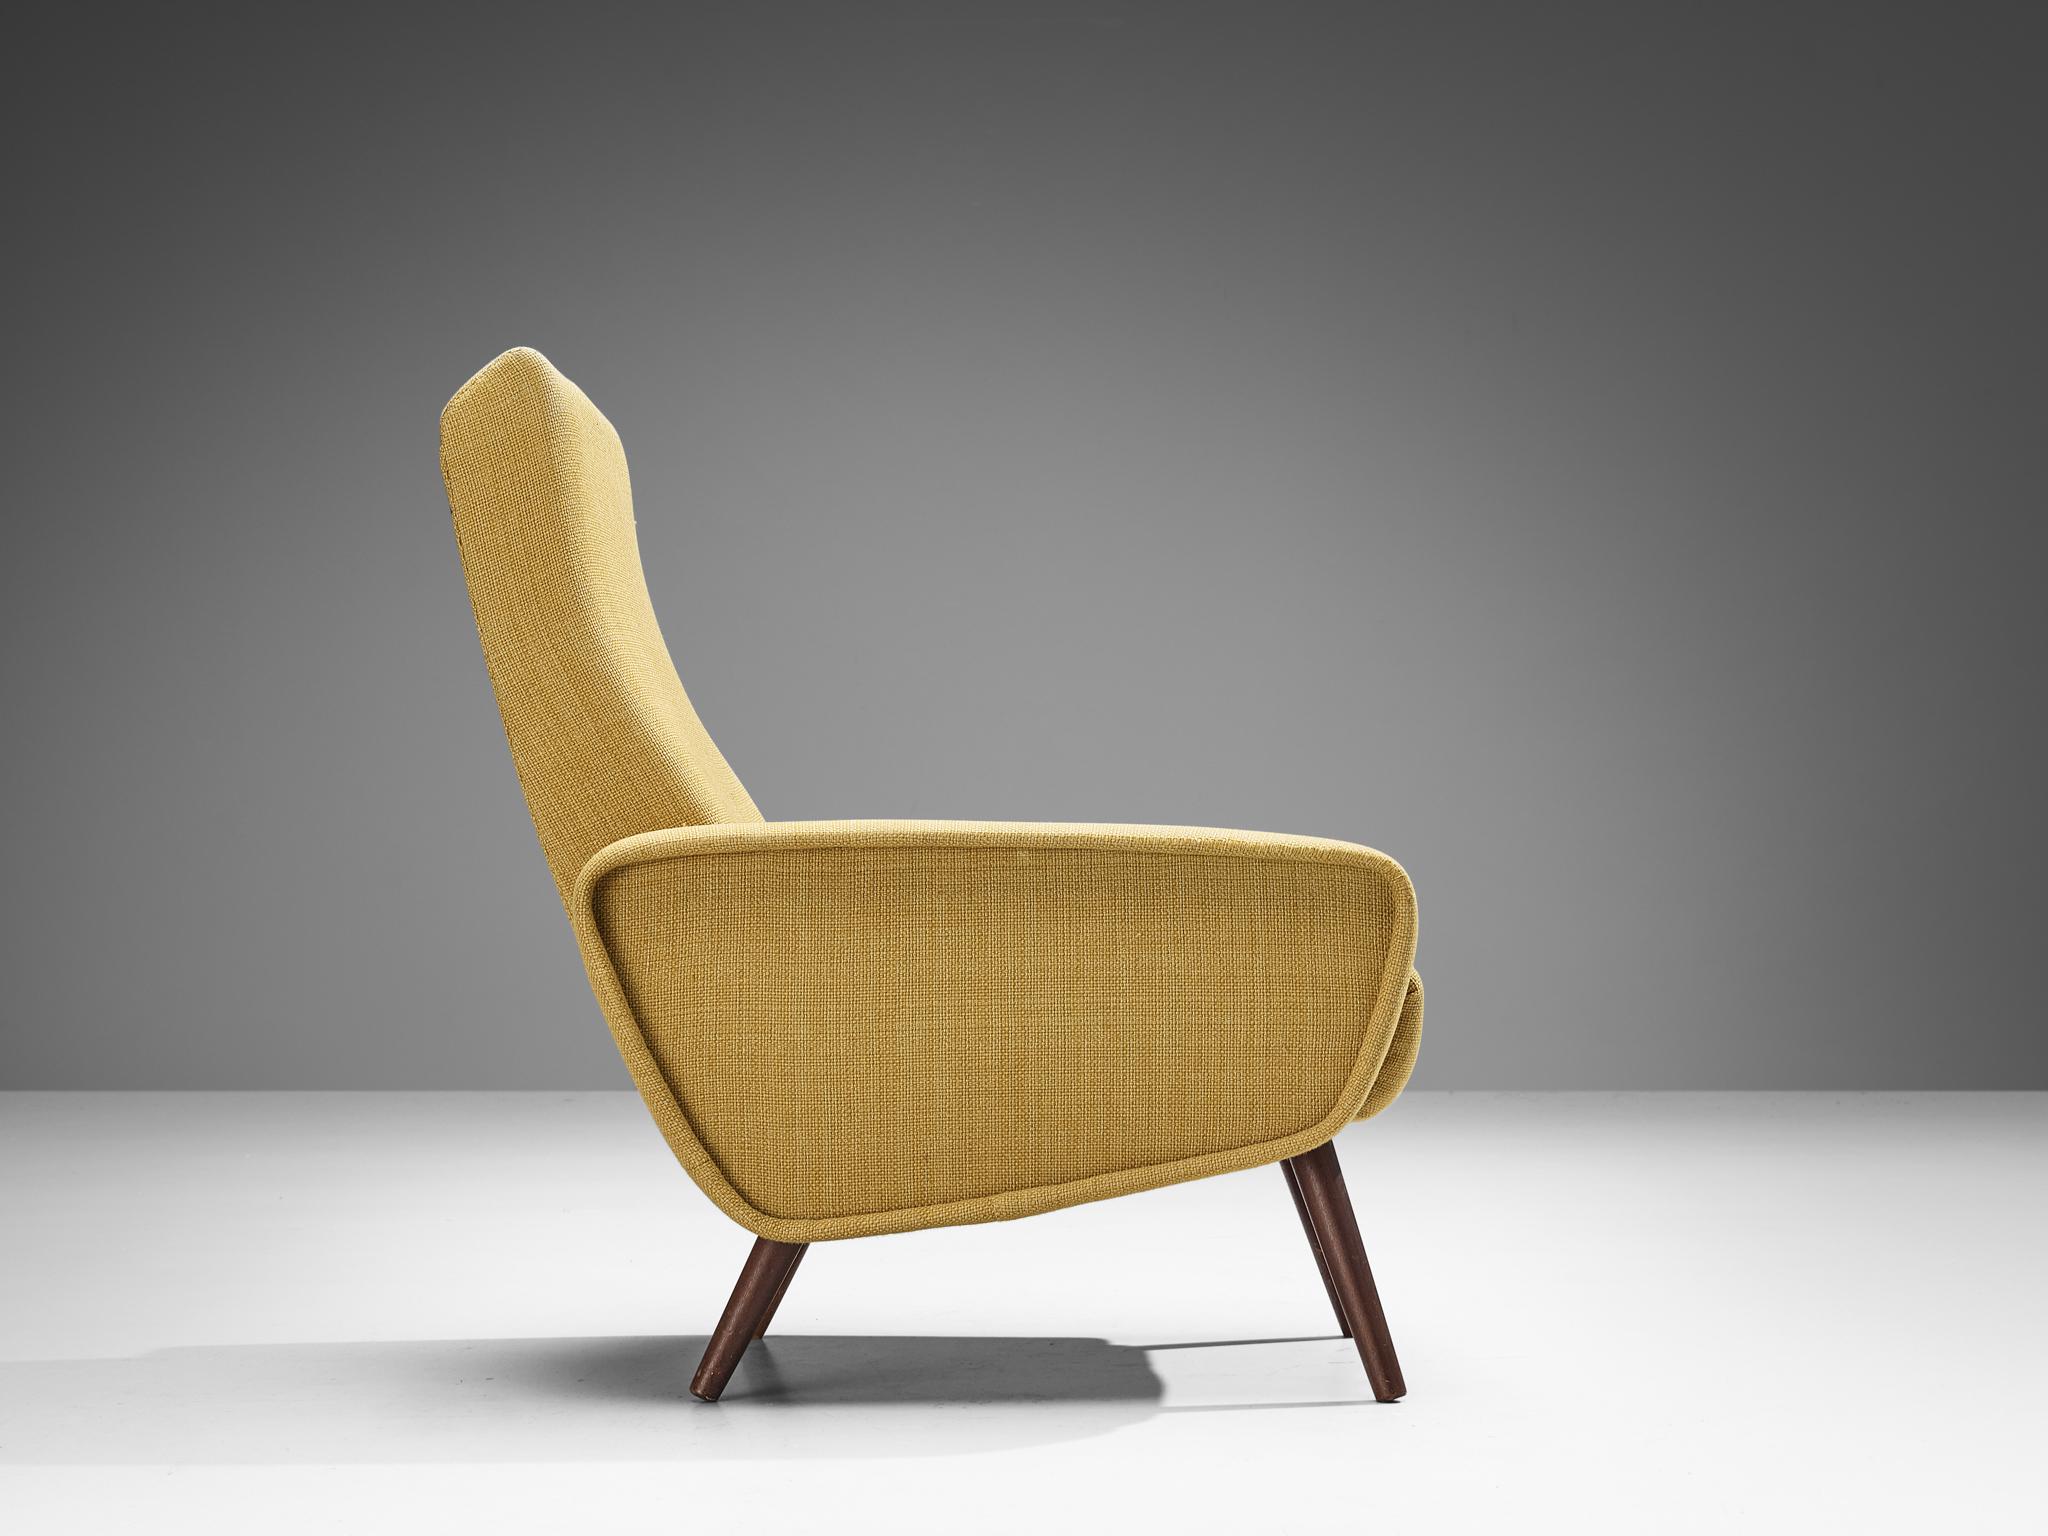 Italian Midcentury Lounge Chair in Mustard Yellow Upholstery In Good Condition For Sale In Waalwijk, NL